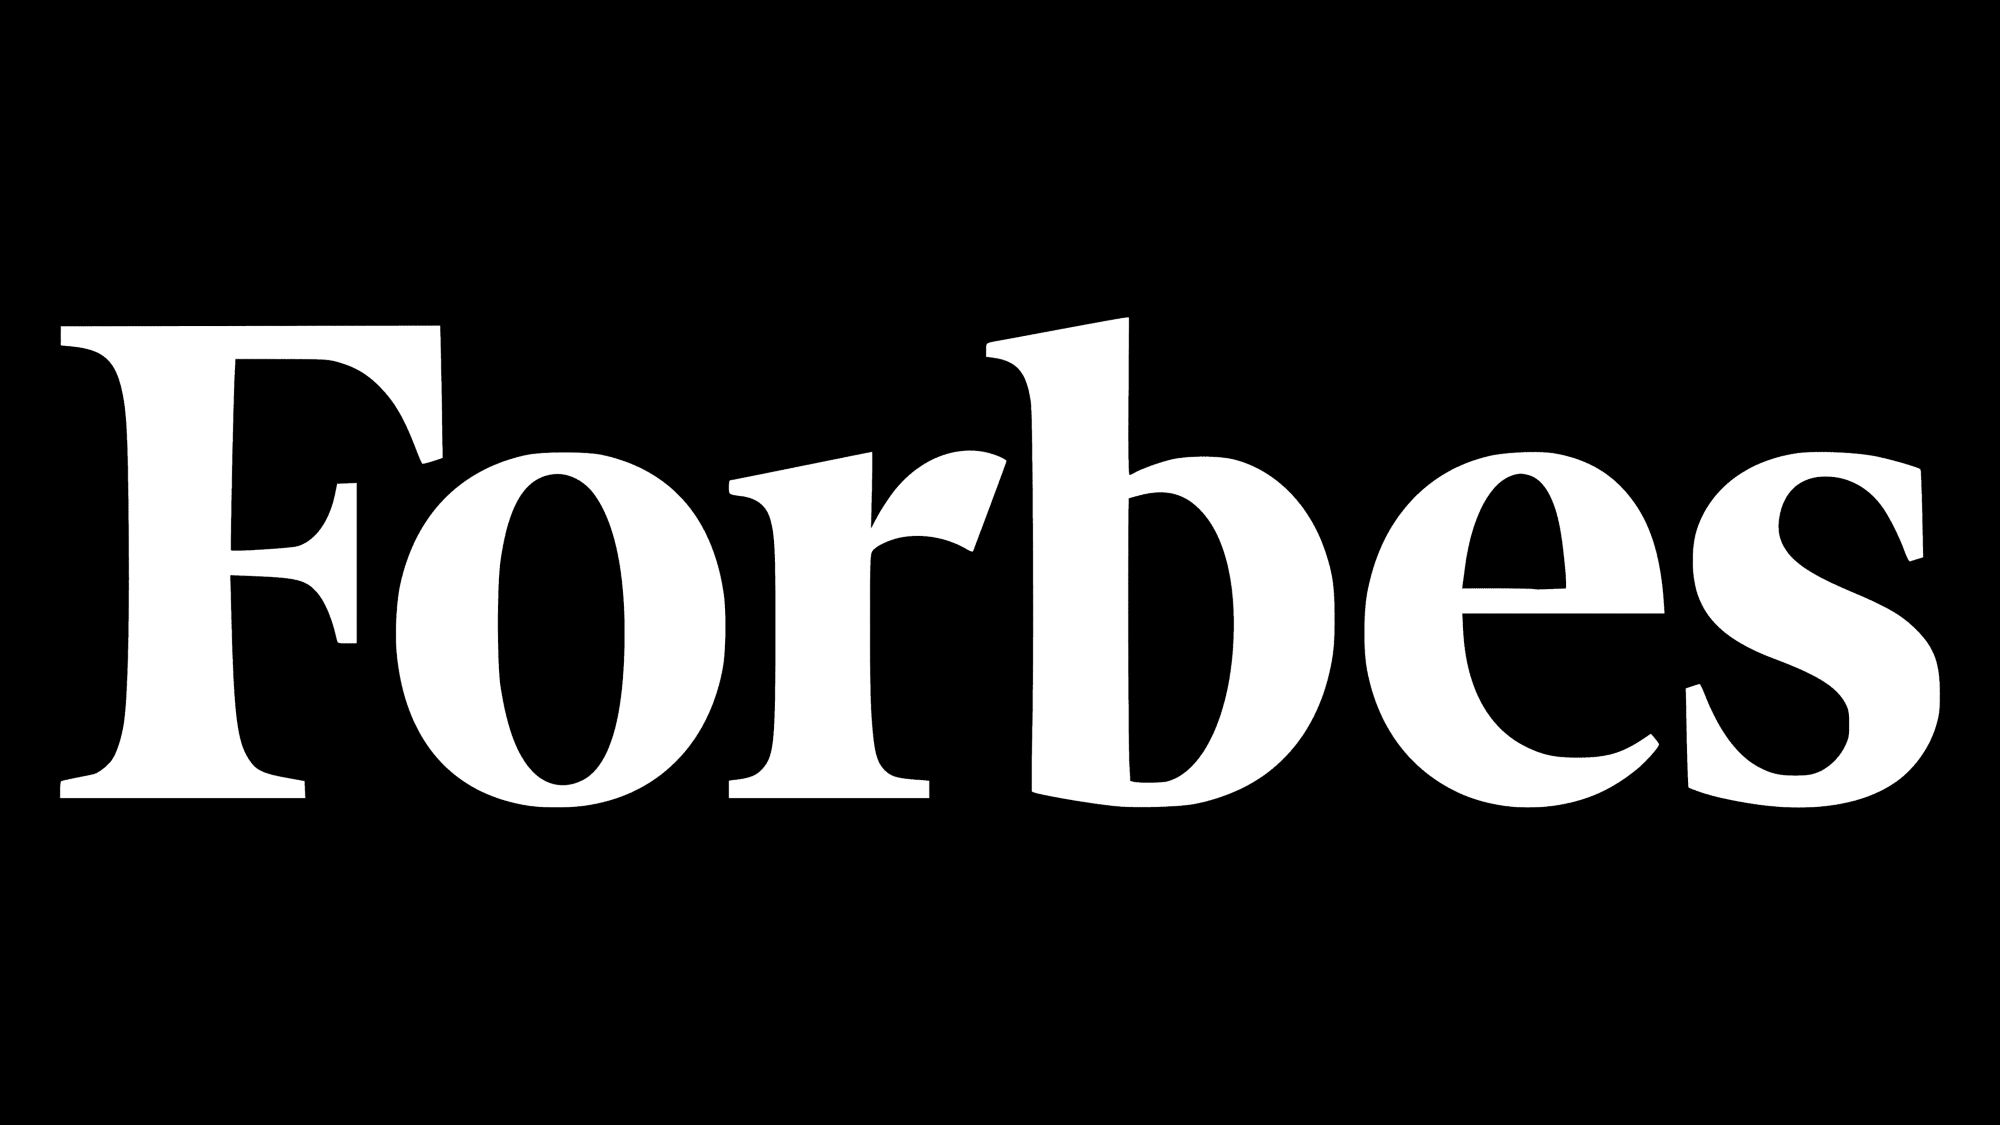 12-enigmatic-facts-about-forbes